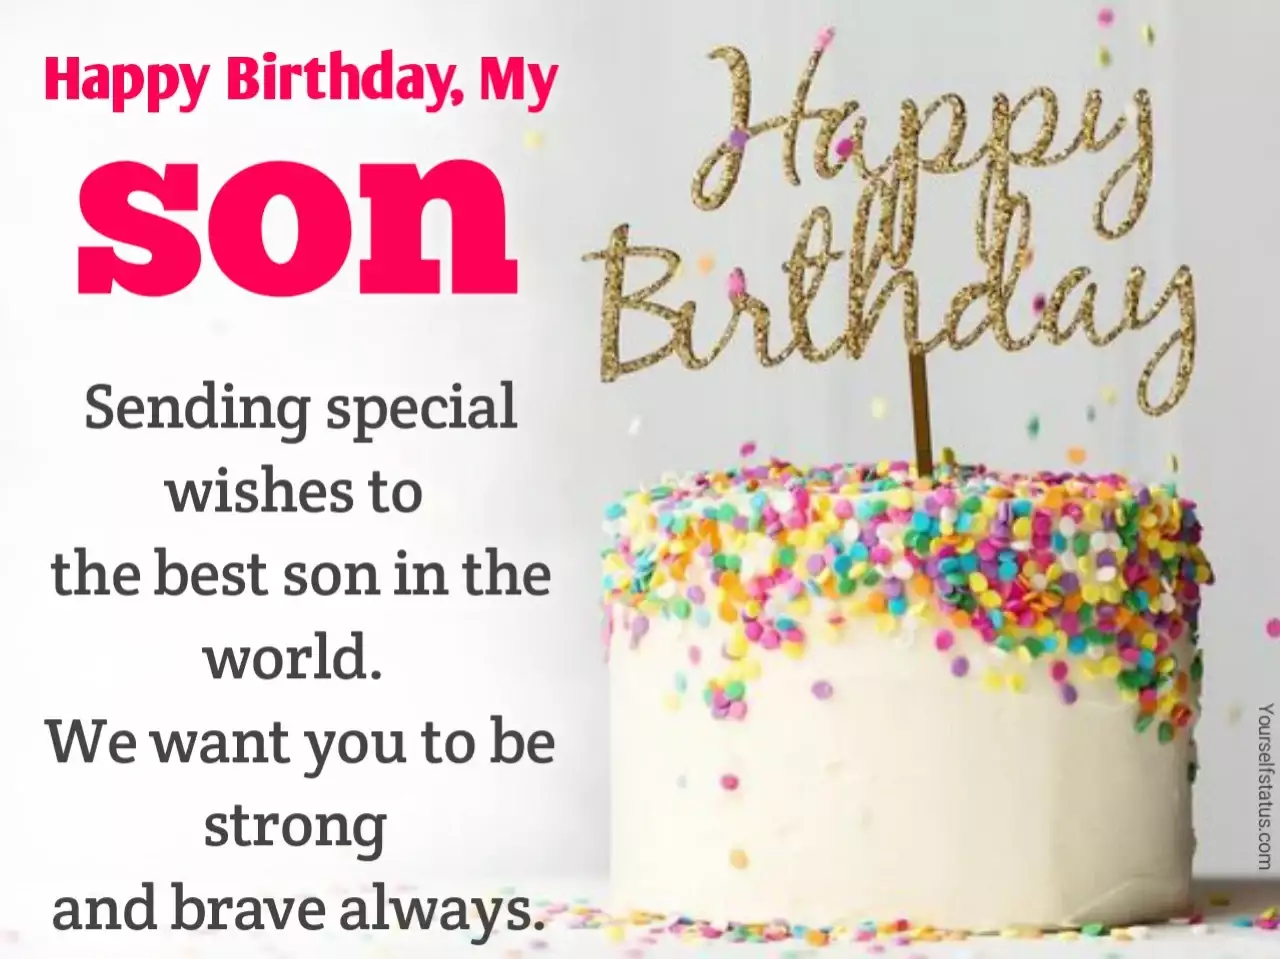 Happy birthday images for son in english